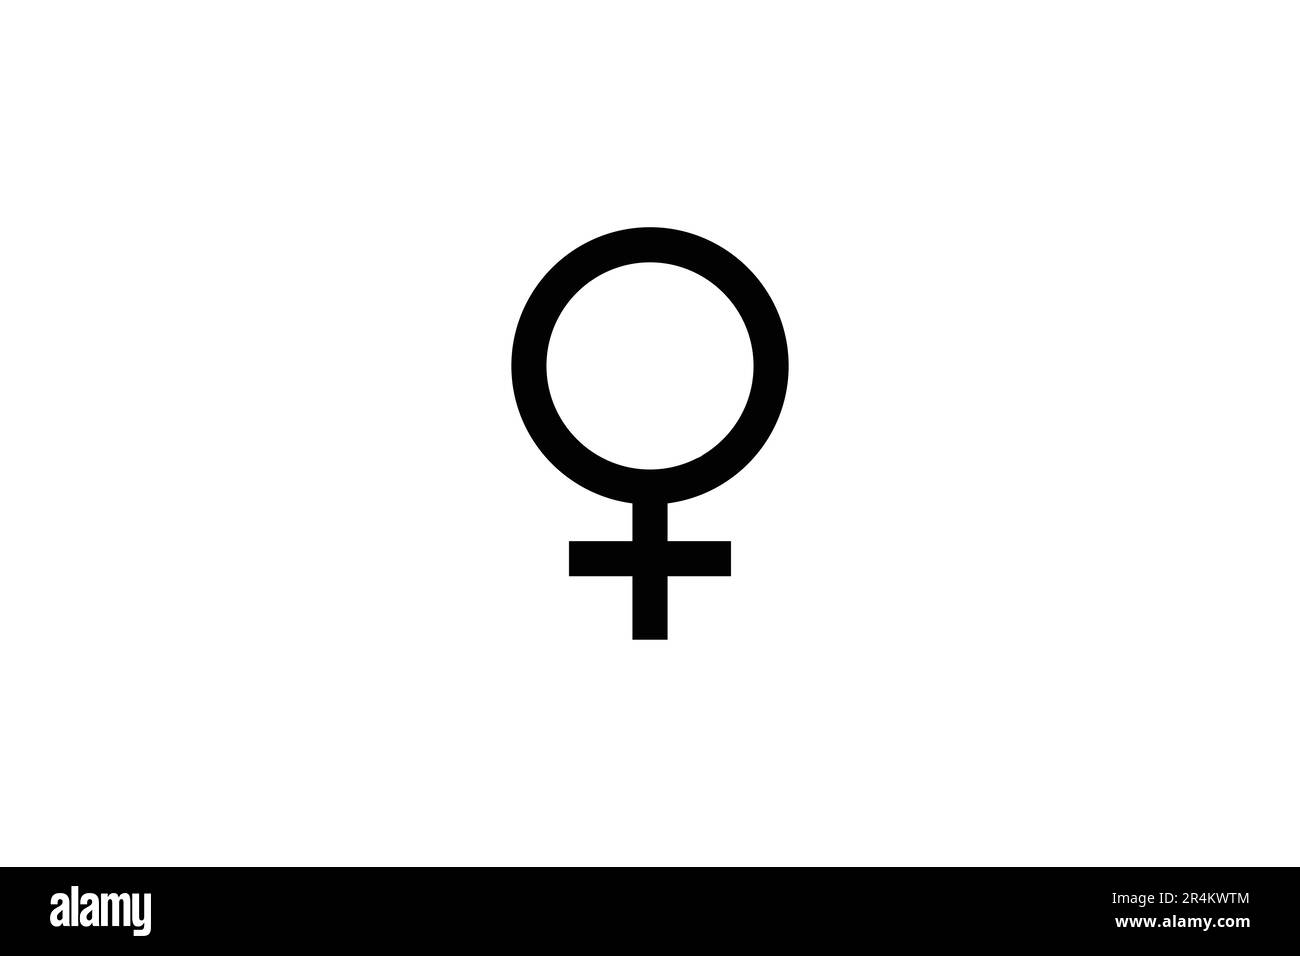 sign for female. Icon related to gender. Line icon style design. Simple vector design editable Stock Vector